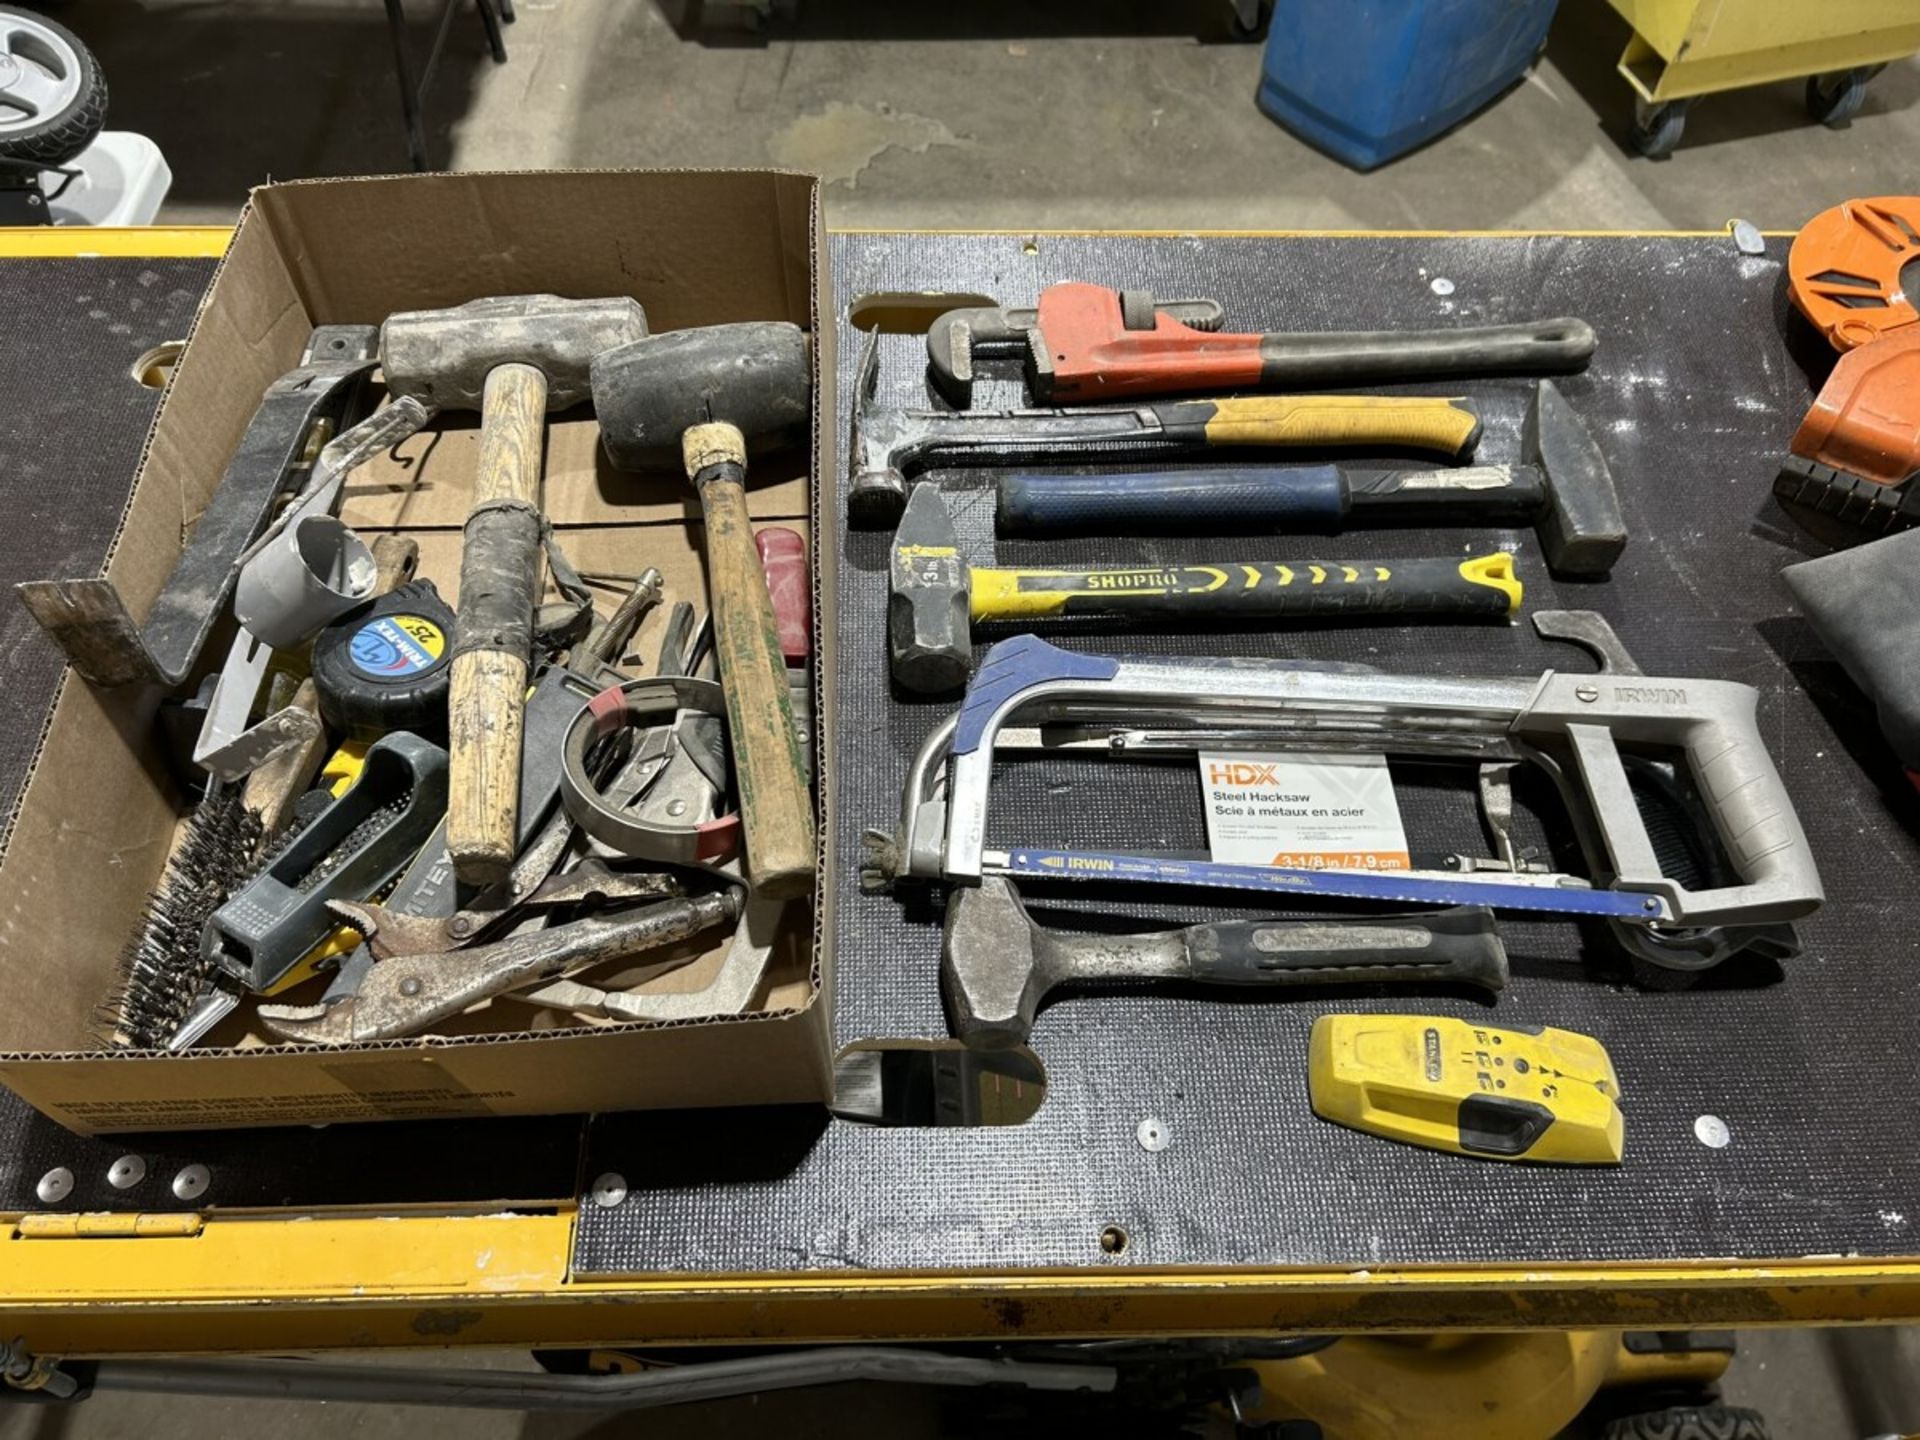 L/O ASSORTED HAND TOOLS, STEEL PIPE WRENCH, HACK SAWS, ETC.